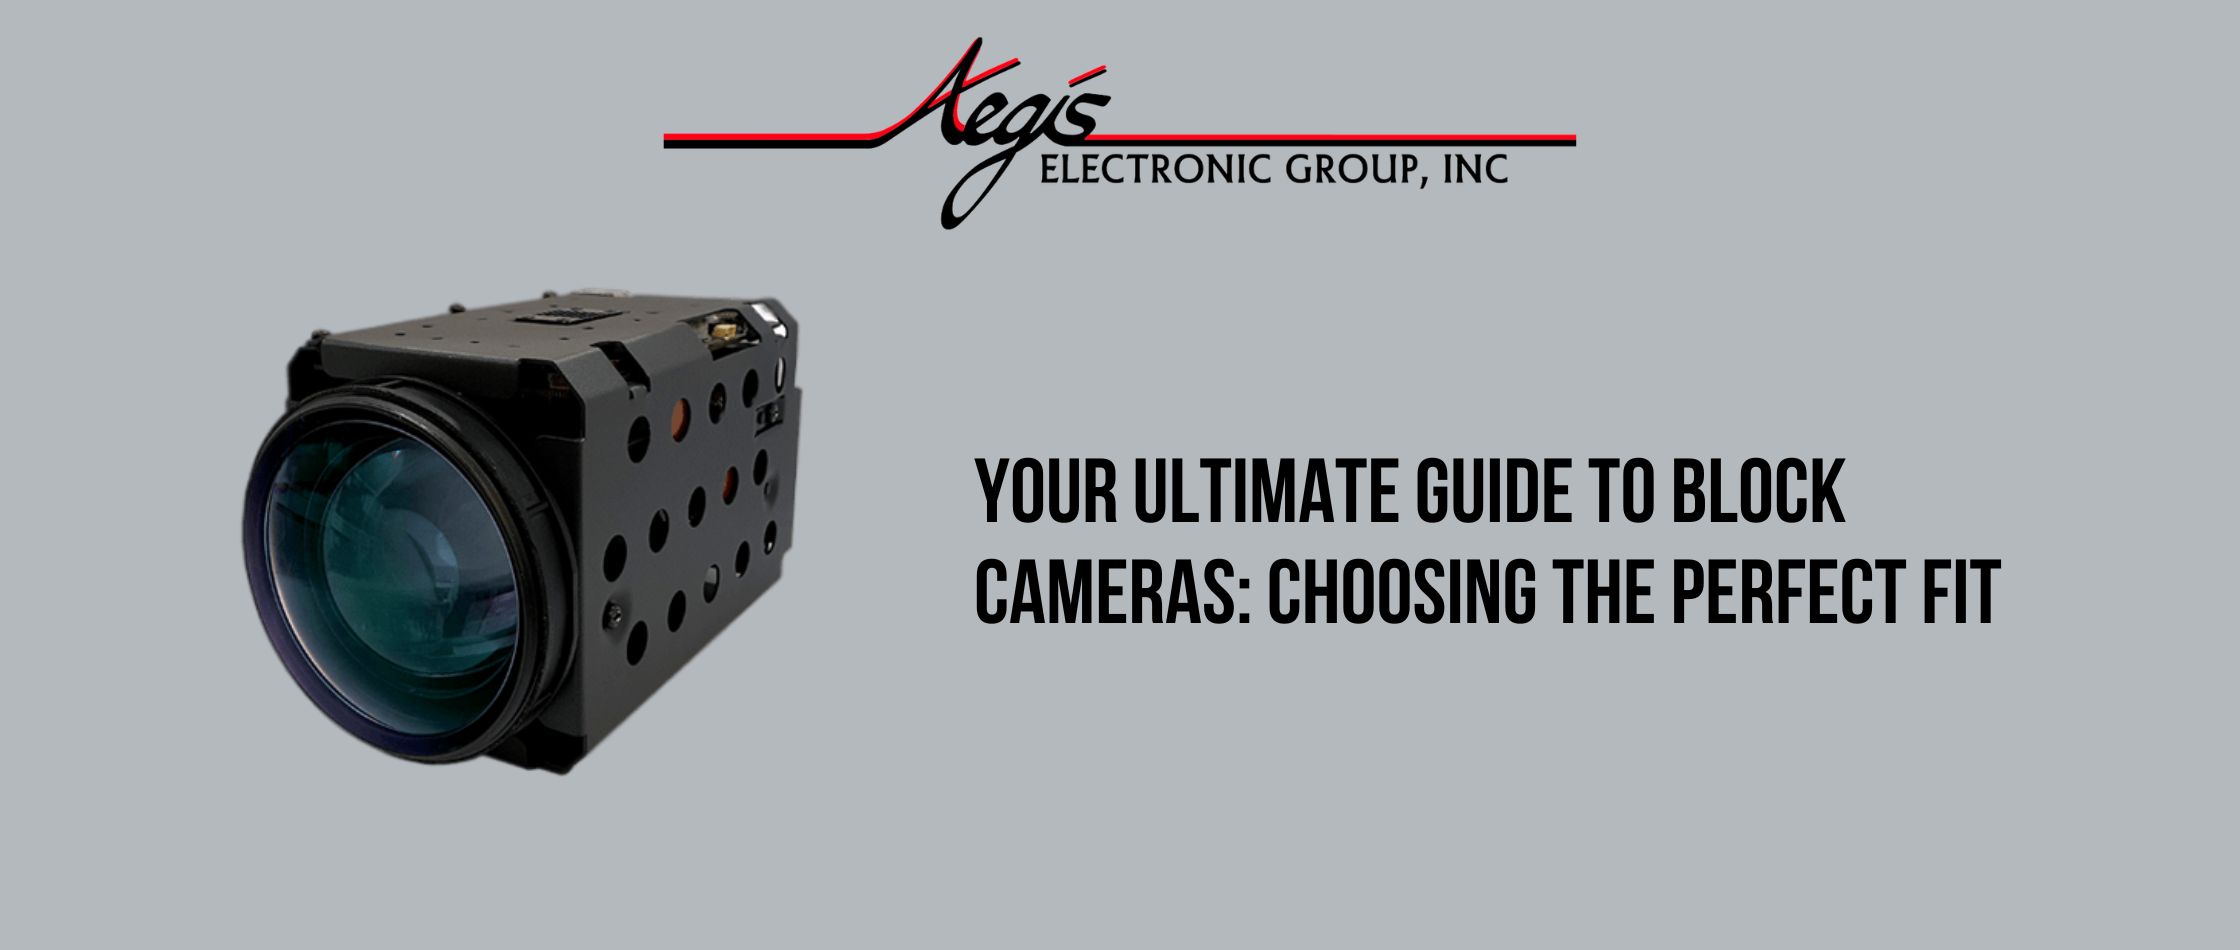 Your Ultimate Guide to Block Cameras: Choosing the Perfect Fit